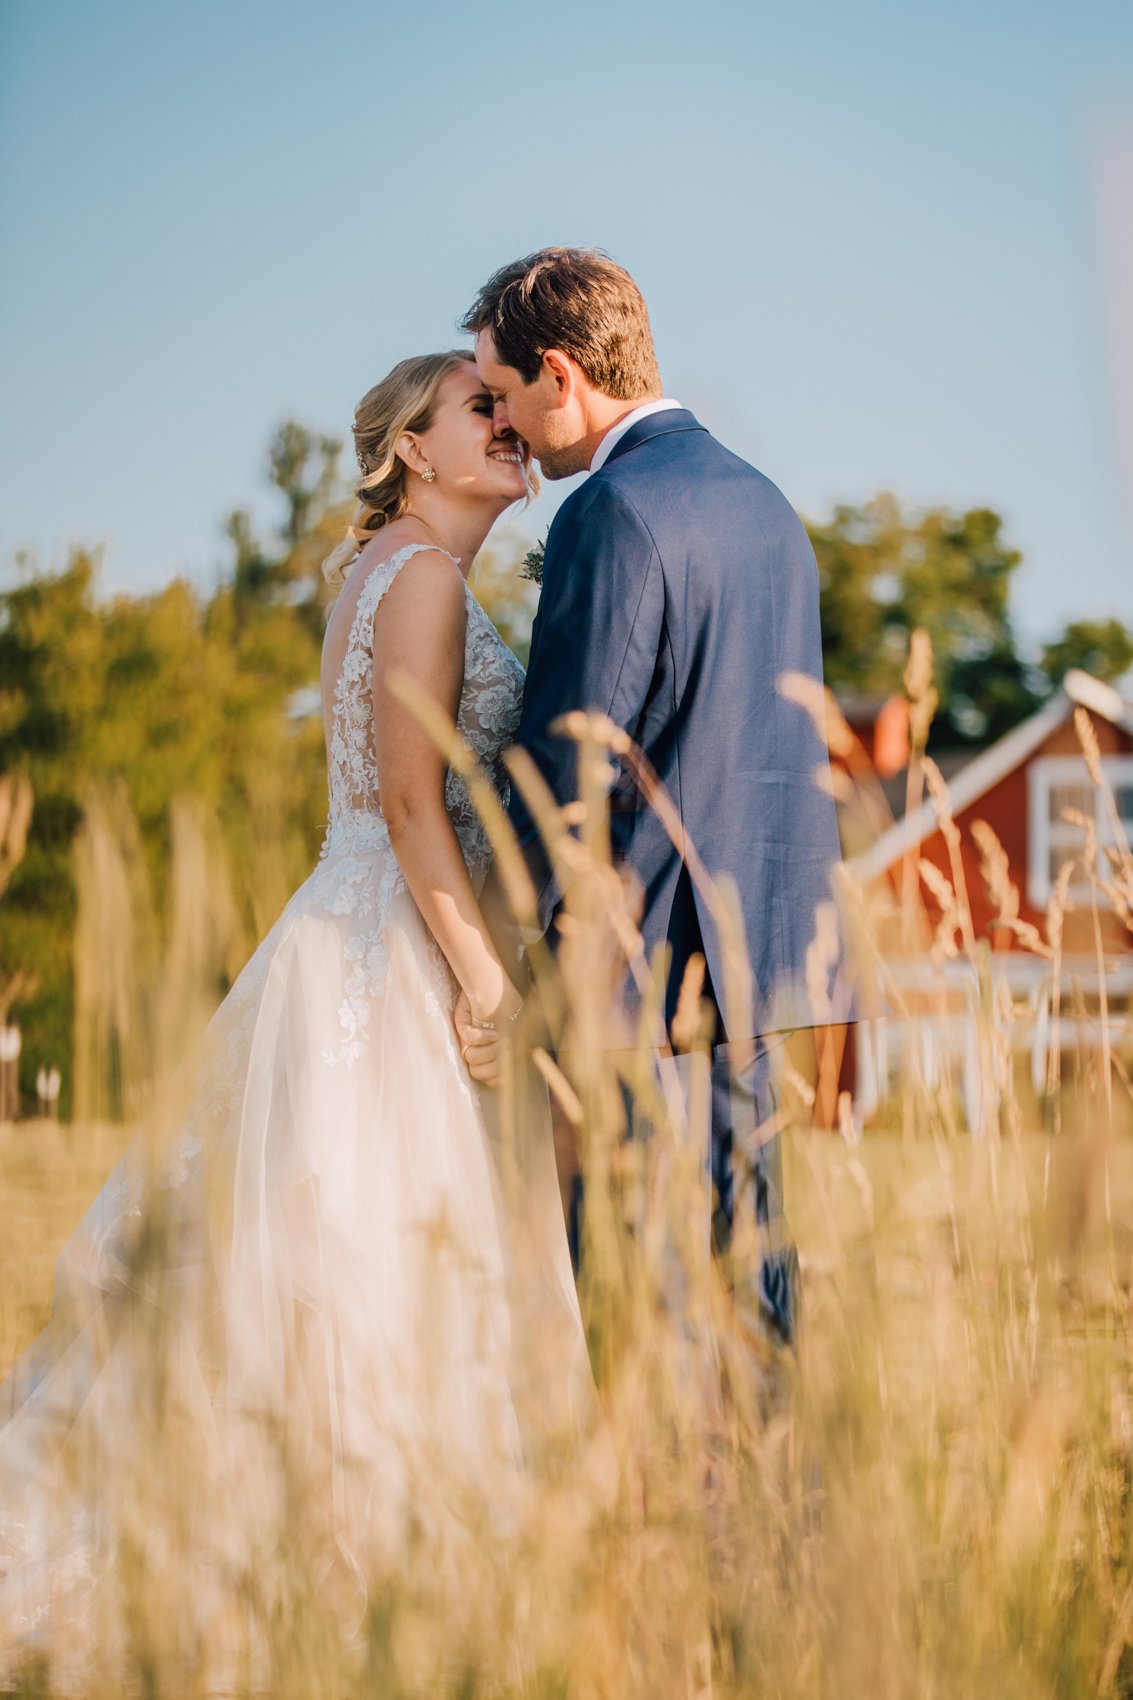  Bride and Groom stand in a field of tall grass at sunset taking wedding photos with Brittany Juravich 